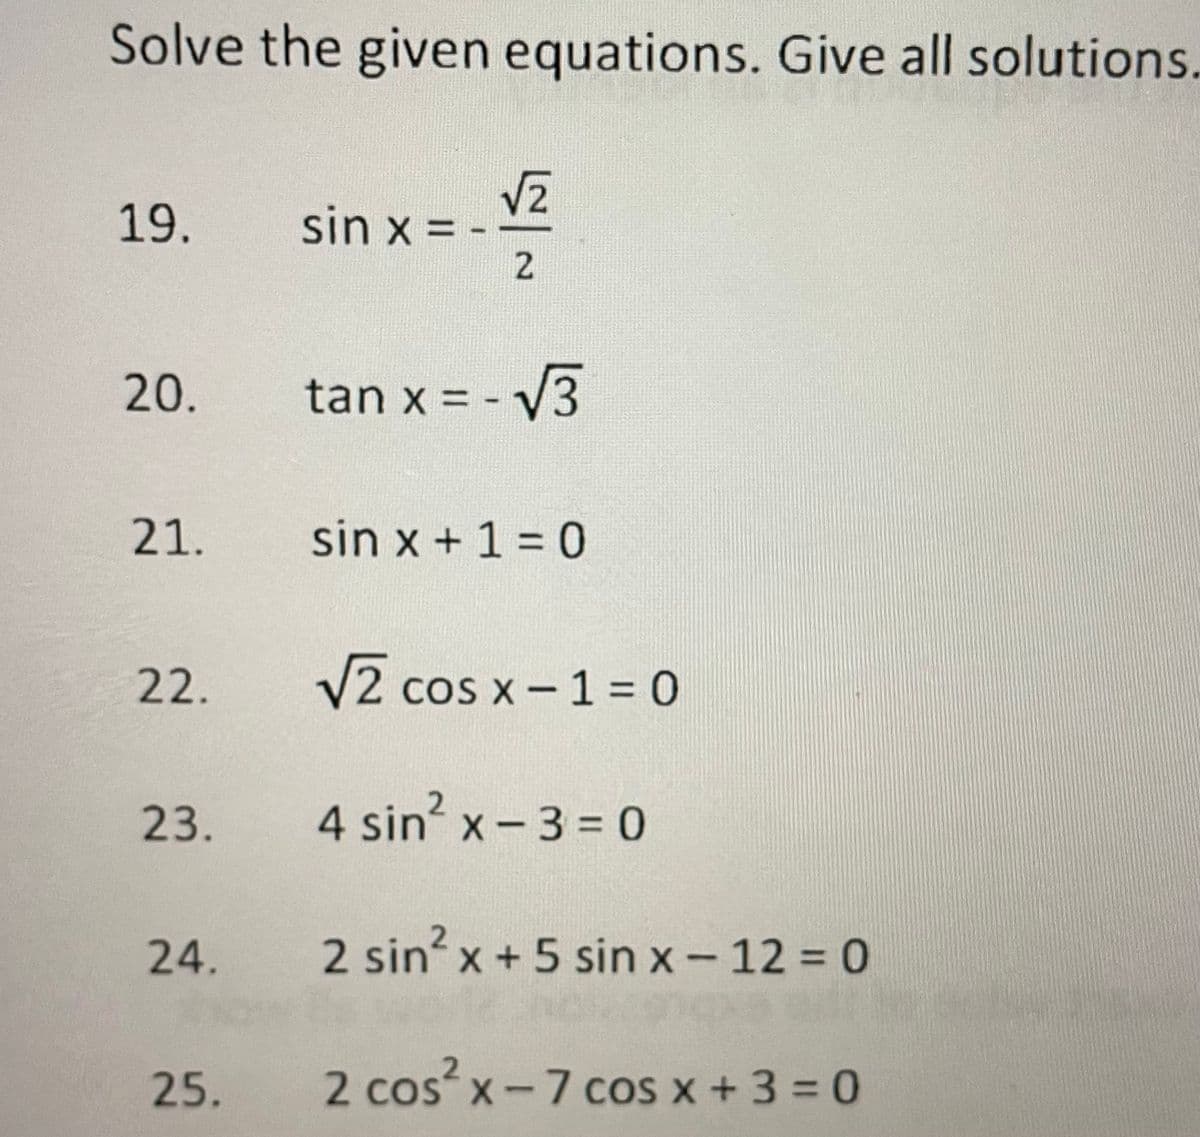 Solve the given equations. Give all solutions.
19.
sin x = -
2.
20.
tan x = - V3
21.
sin x + 1 = 0
22.
V2 cos x- 1 = 0
23.
4 sin? x -3 = 0
24.
2 sin x +5 sin x - 12 = 0
25.
2 cos x-7 cos x + 3 = 0
